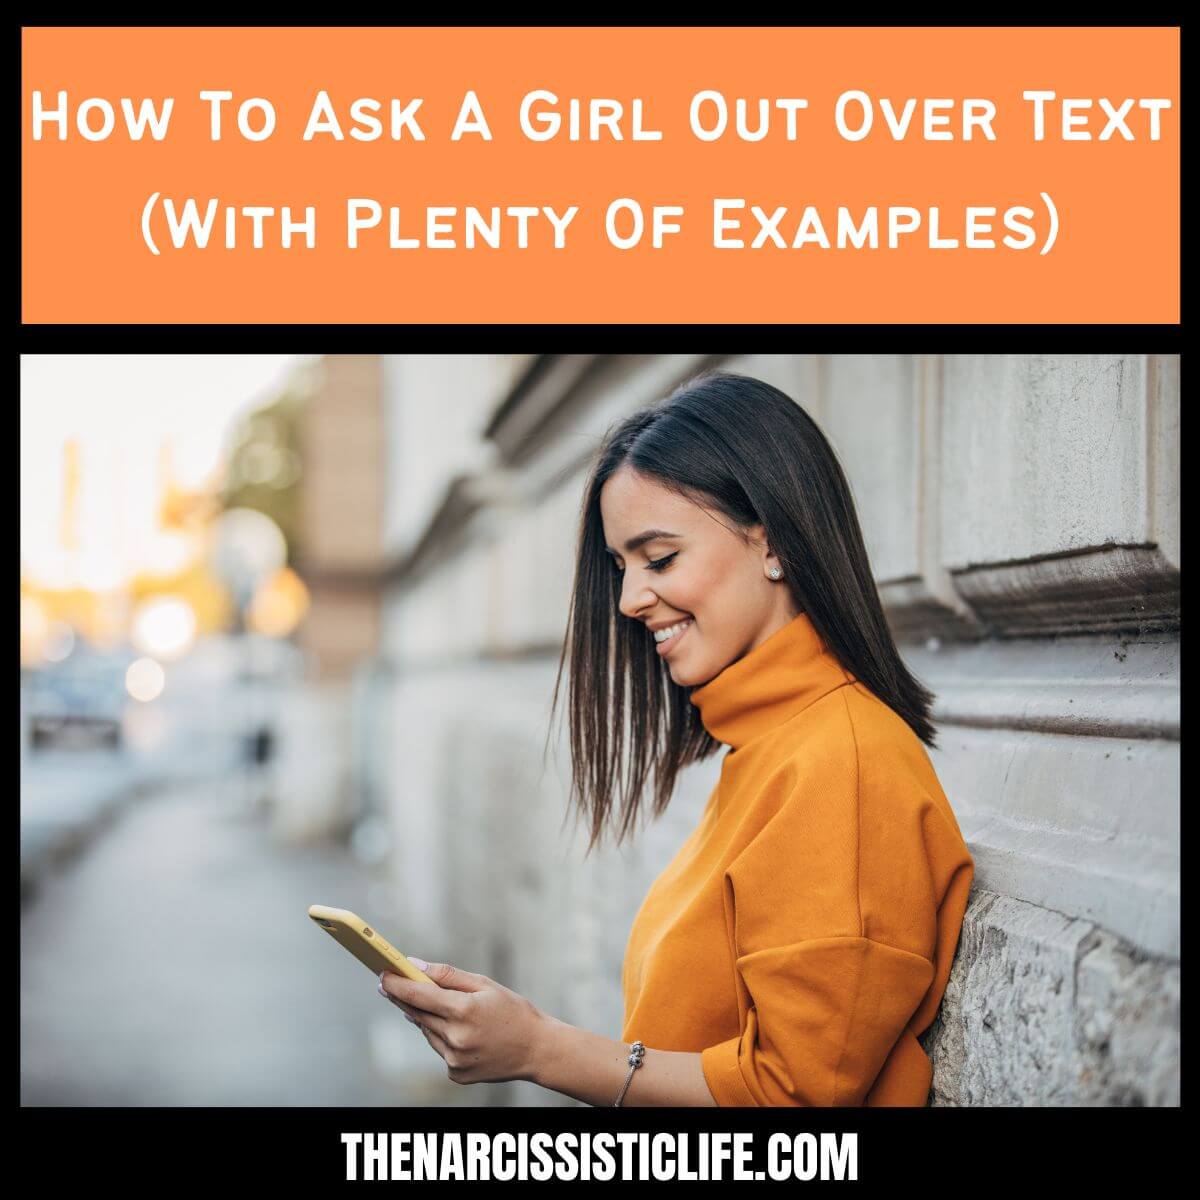 How To Ask A Girl Out Over Text (With Plenty Of Examples)